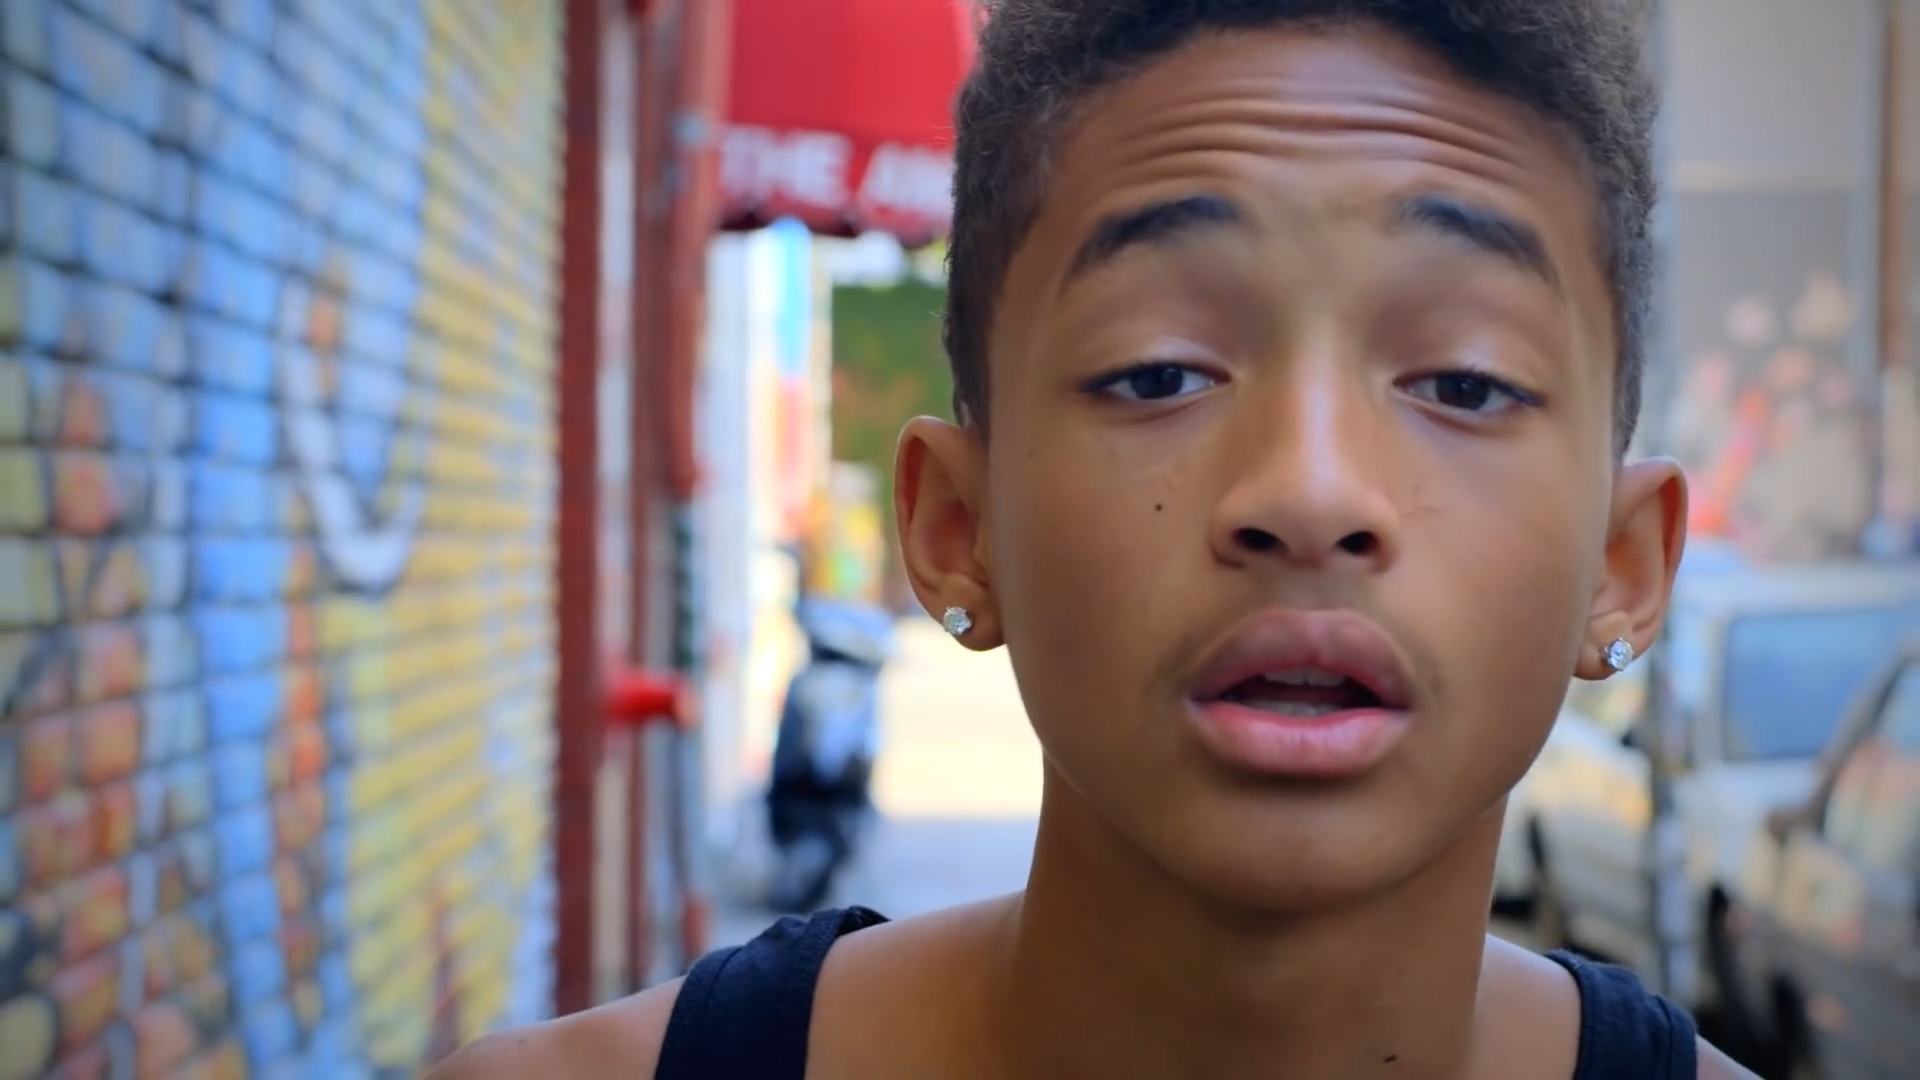 Picture Of Jaden Smith In Music Video The Coolest Jaden Smith 1643333318 Teen Idols 4 You 5002